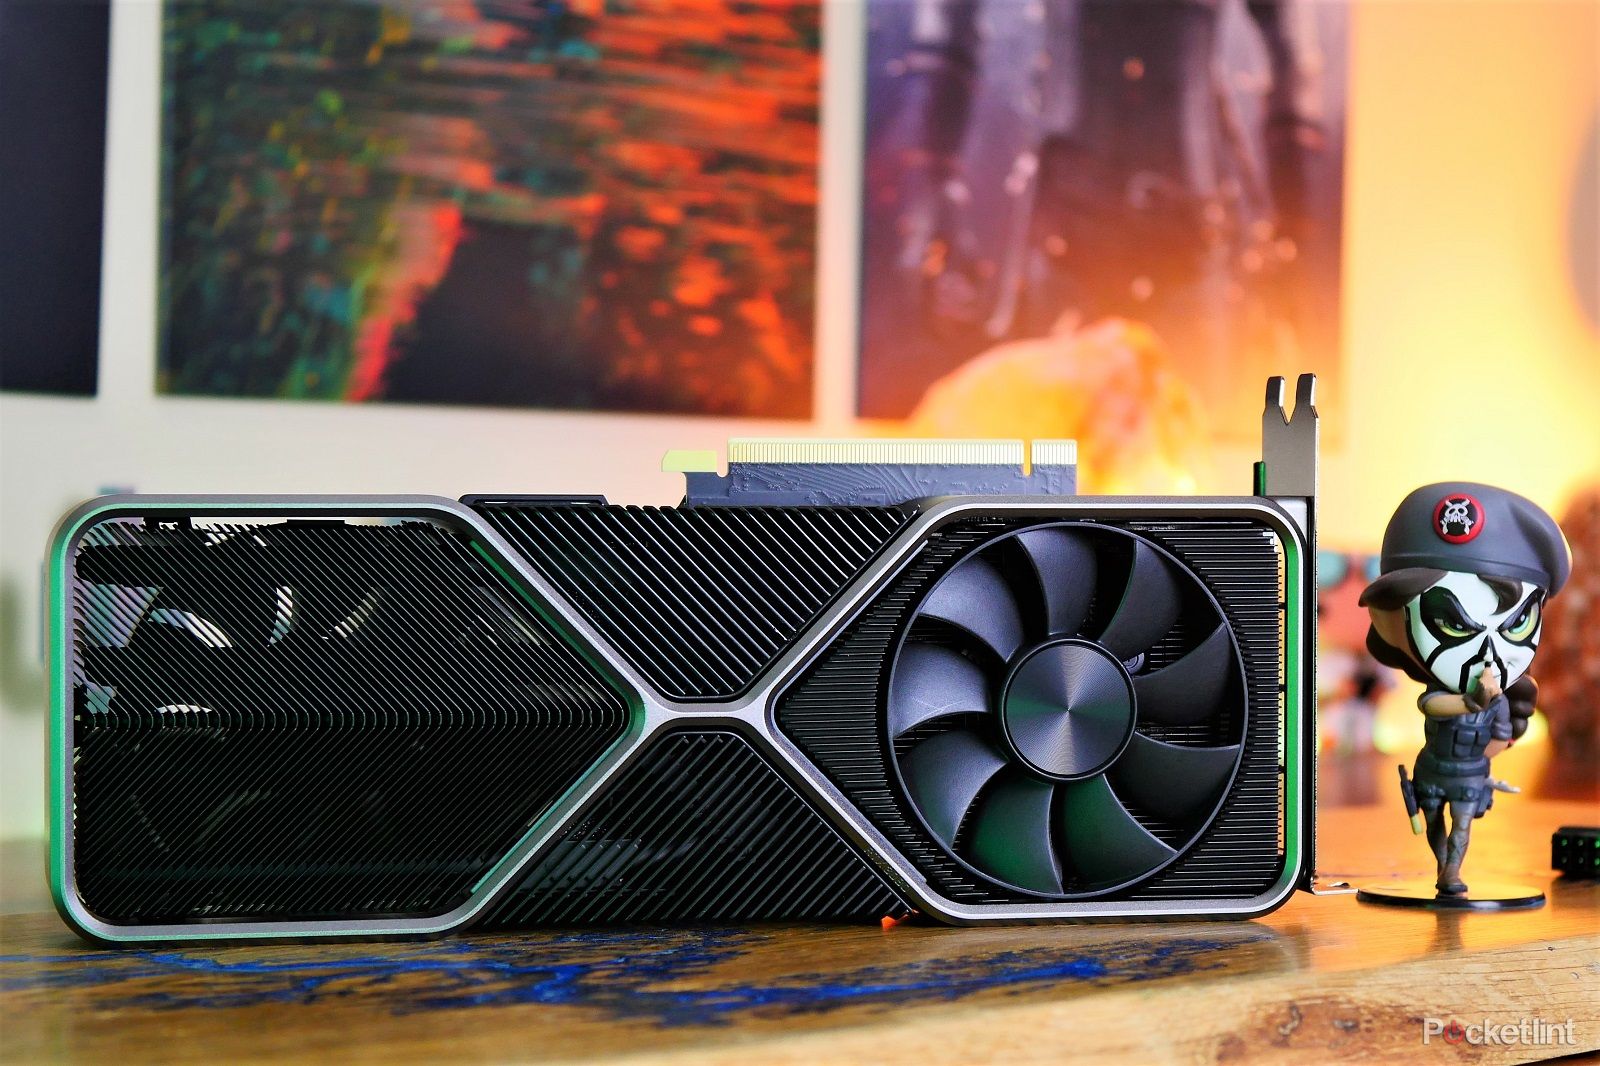 GPU shortage to continue throughout 2022 according to Nvidia